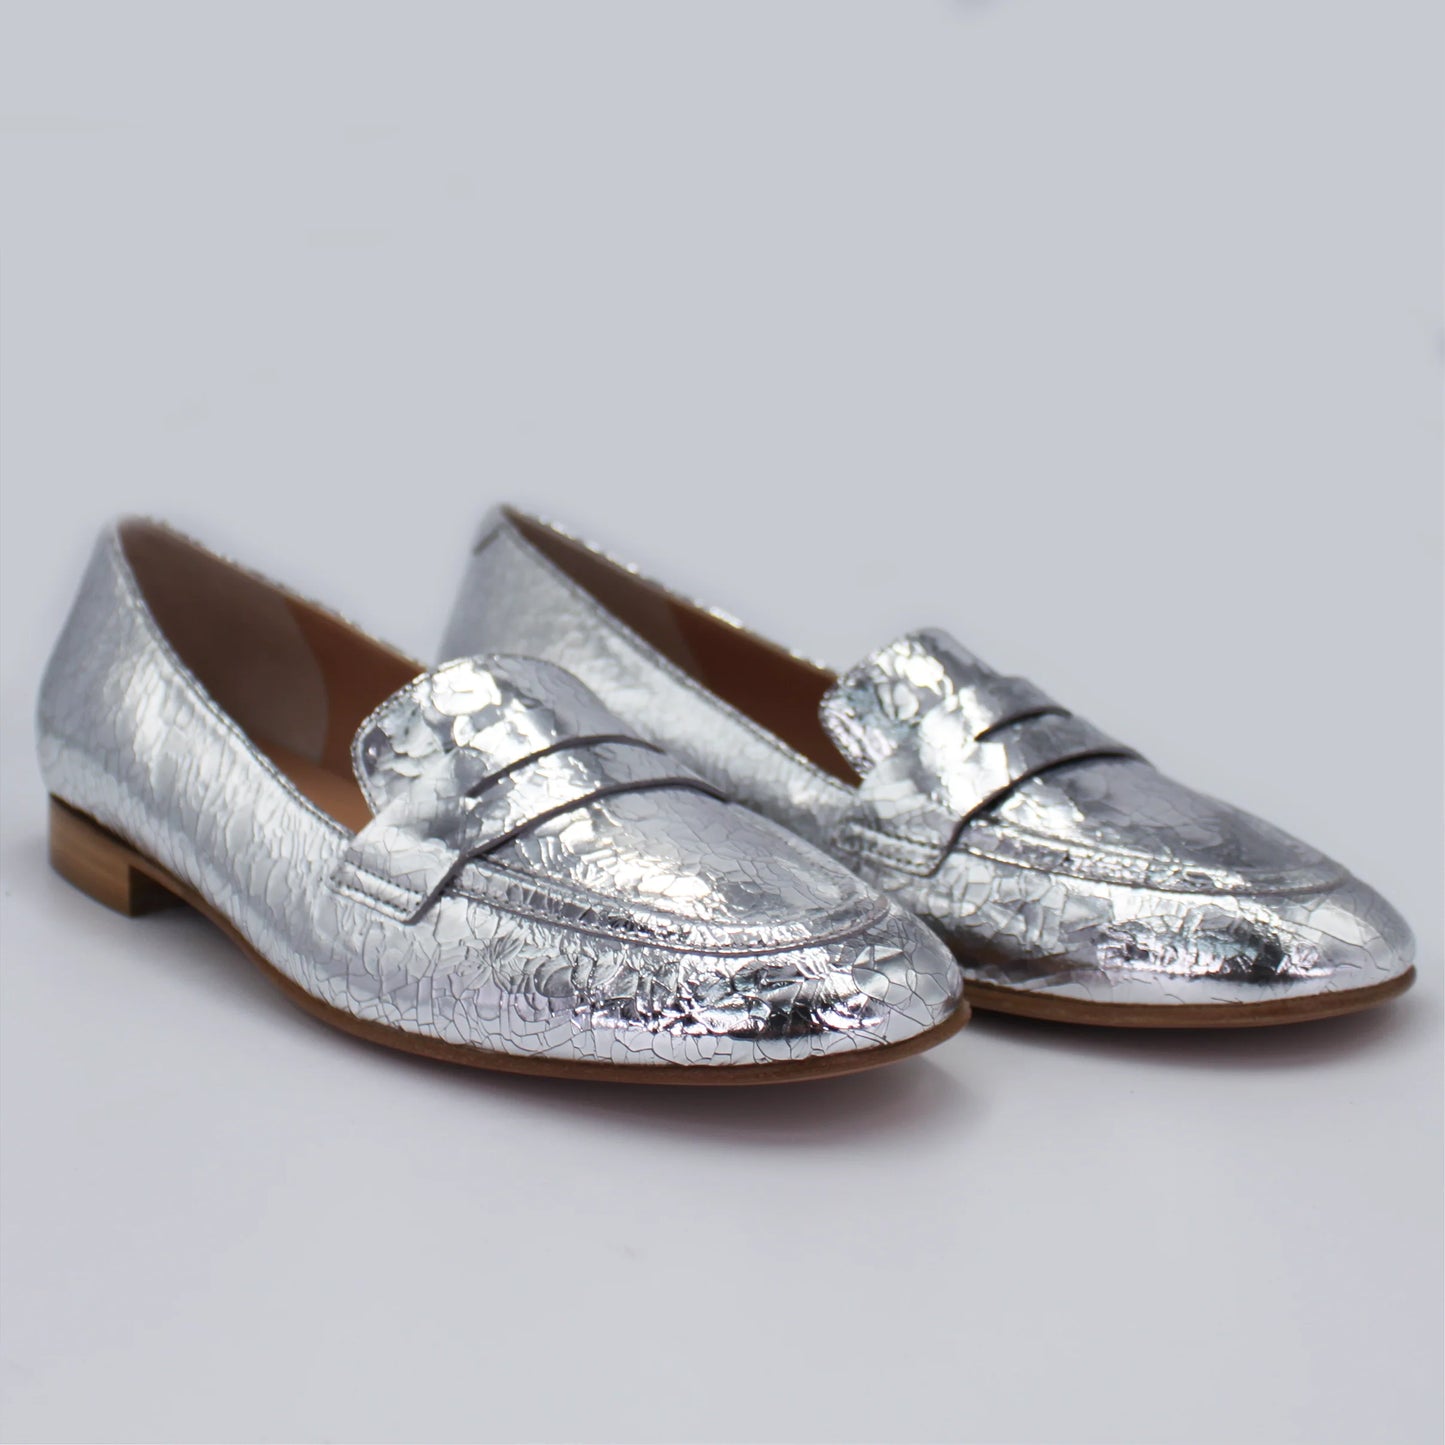 Shop Handmade Italian Leather Moccasin/Loafer in Silver for Women (60531) or browse our range of hand-made Italian moccasins & loafers for women in leather or suede in-store at Aliverti Durban or Cape Town, or shop online. We deliver in South Africa & offer multiple payment plans as well as accept multiple safe & secure payment methods.